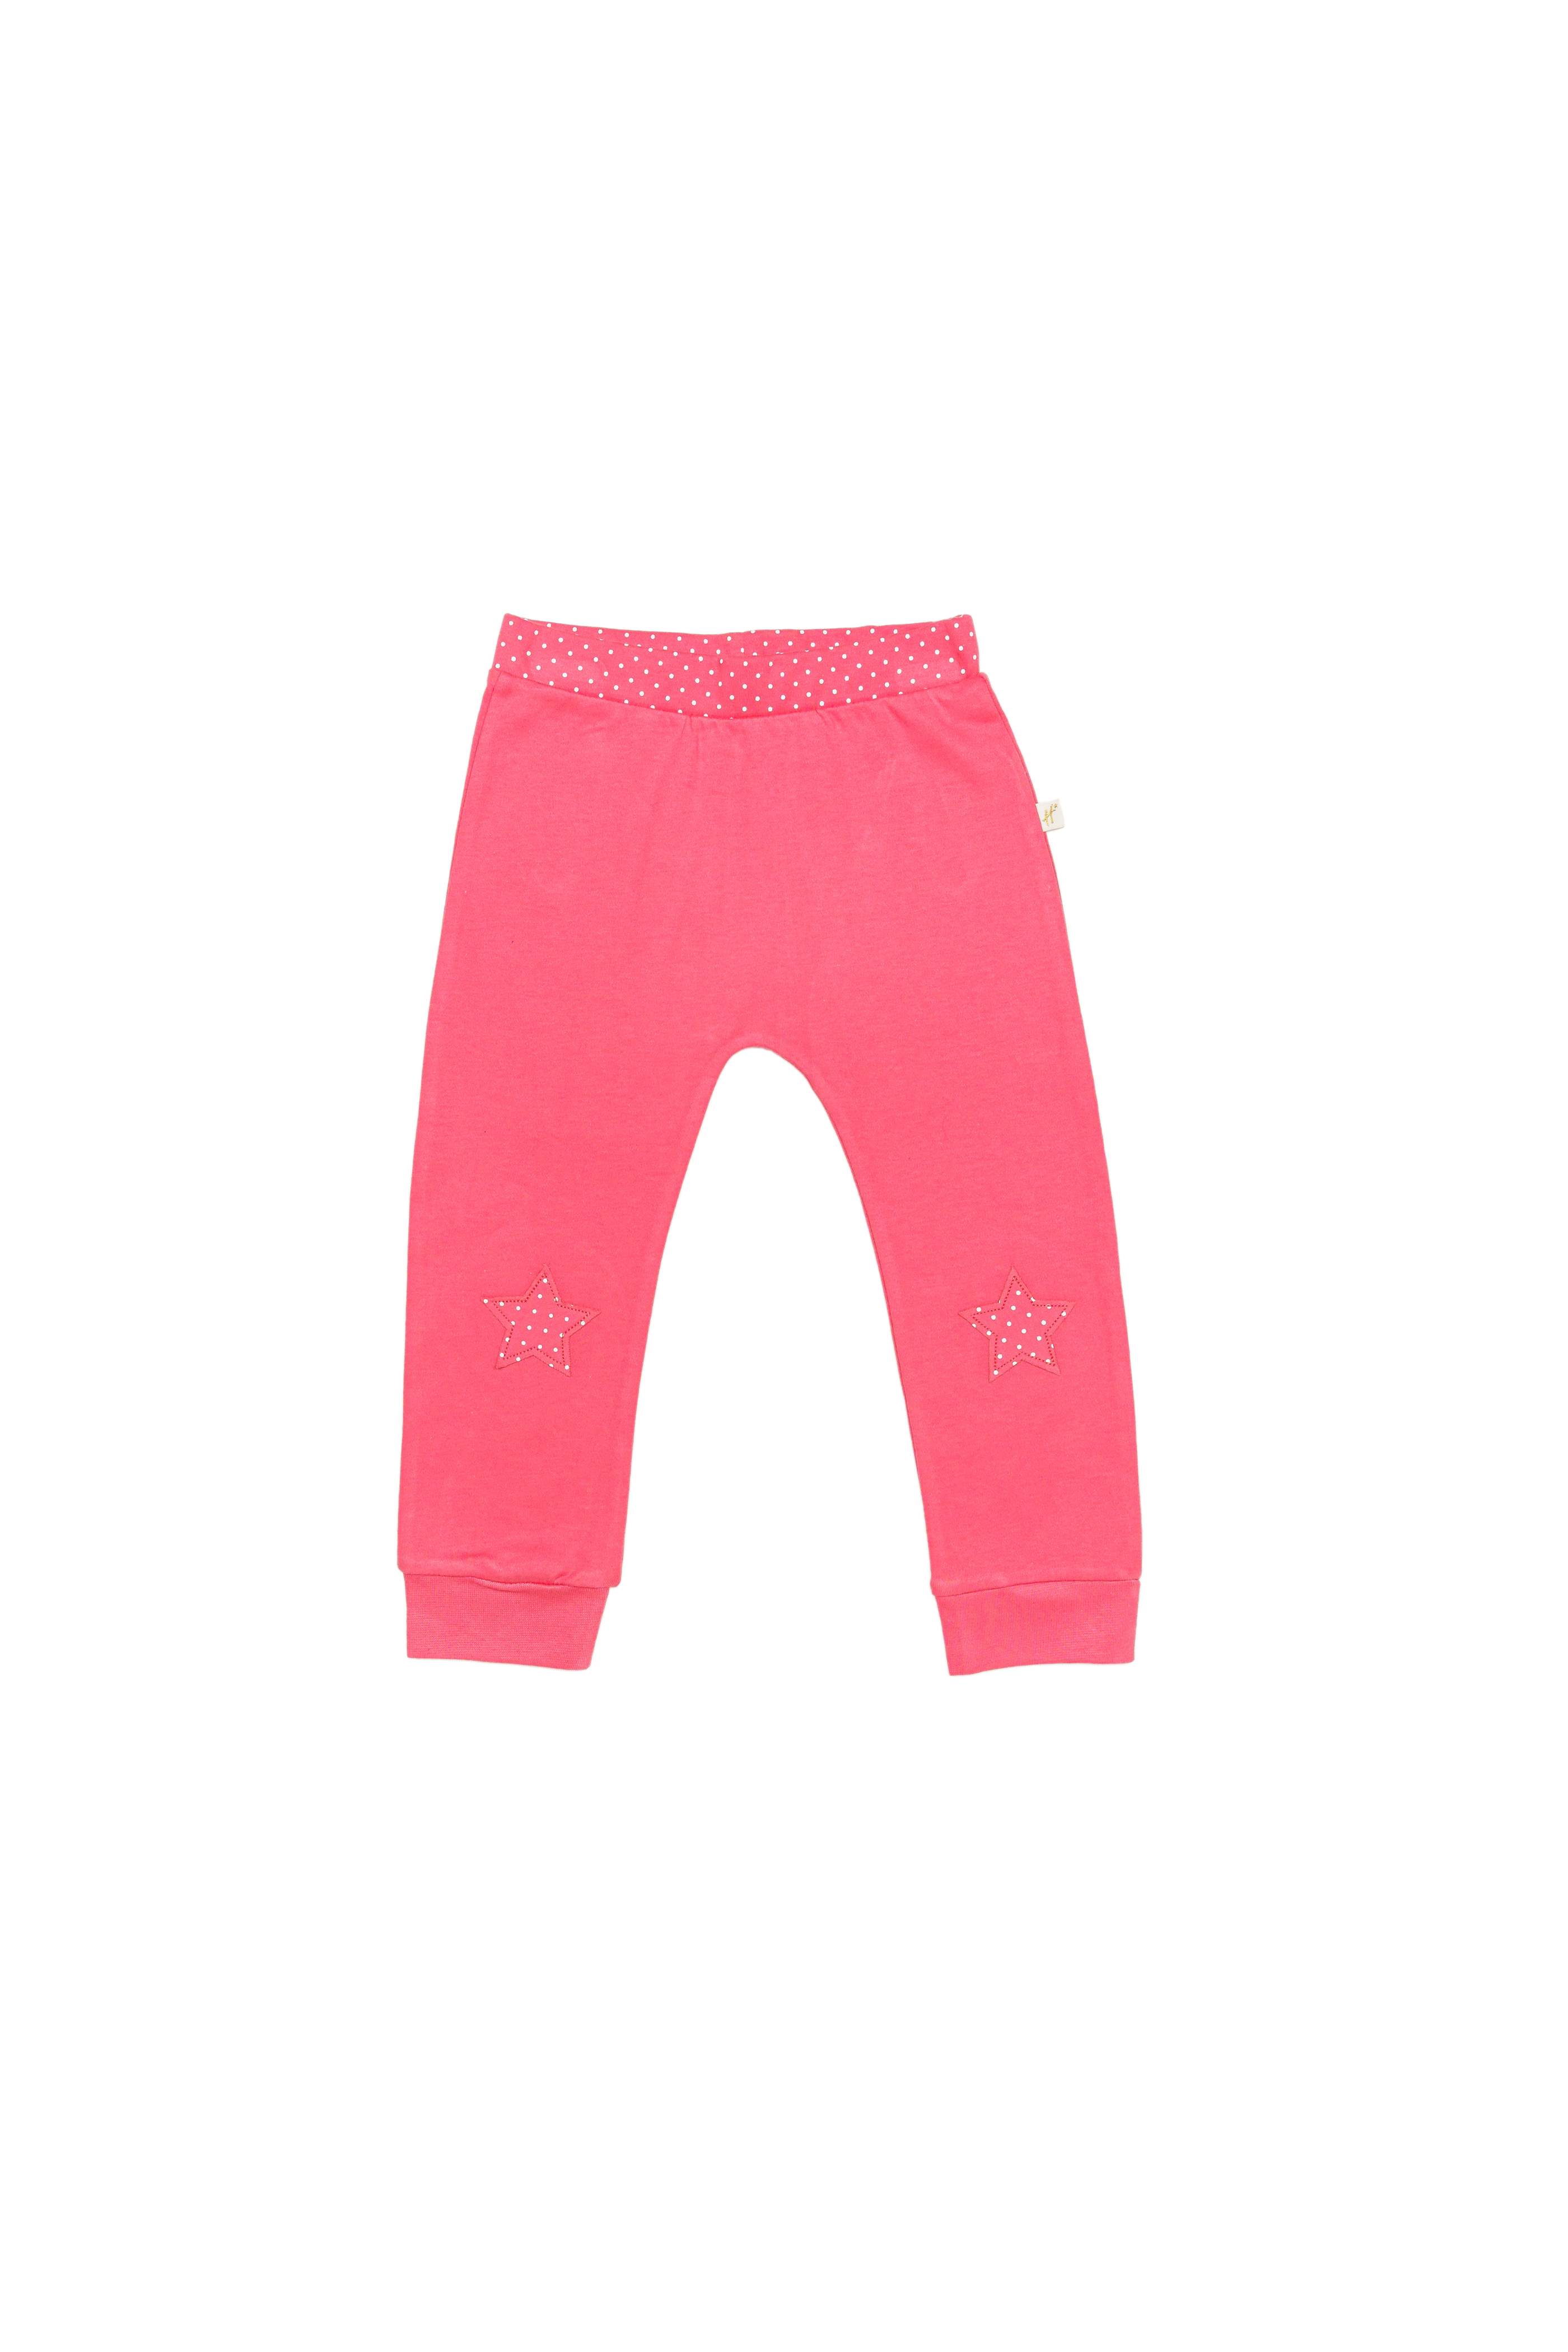 Buy KARROT Solid Cotton Infant Girls Track Pants  Shoppers Stop